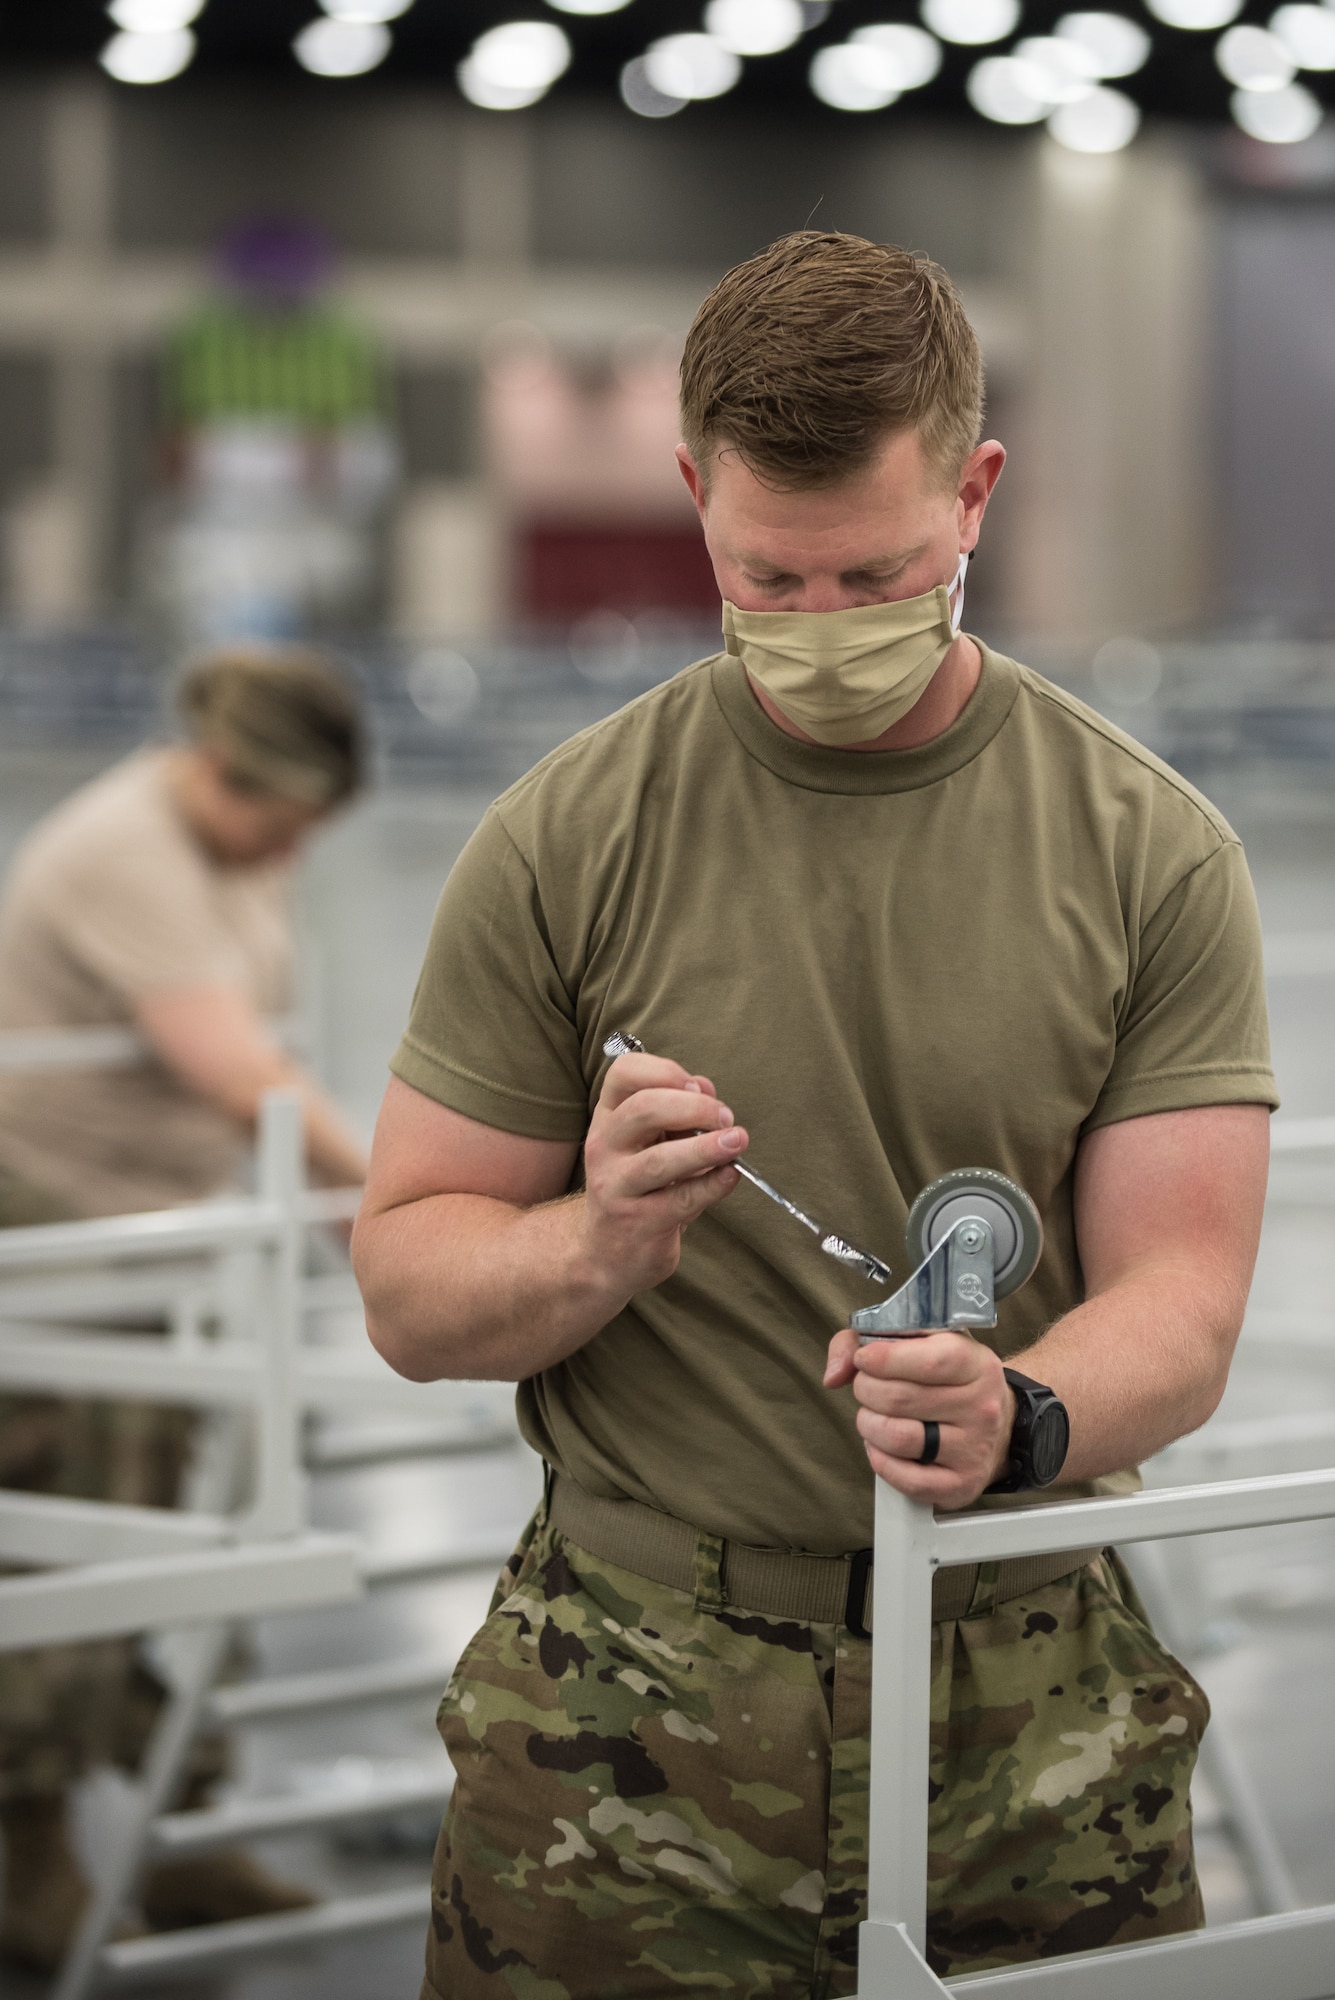 Capt. Jason Selby of the Kentucky Air National Guard’s 123rd Civil Engineer Squadron sets up hospital beds and clinical space at the Kentucky Fair and Exposition Center in Louisville, Ky., April 13, 2020. The site, which is expected to be operational April 15, will serve as an Alternate Care Facility for patients suffering from COVID-19 if area hospitals exceed available capacity. The location initially can treat up to 288 patients and is scalable to 2,000 beds. (U.S. Air National Guard photo by Dale Greer)